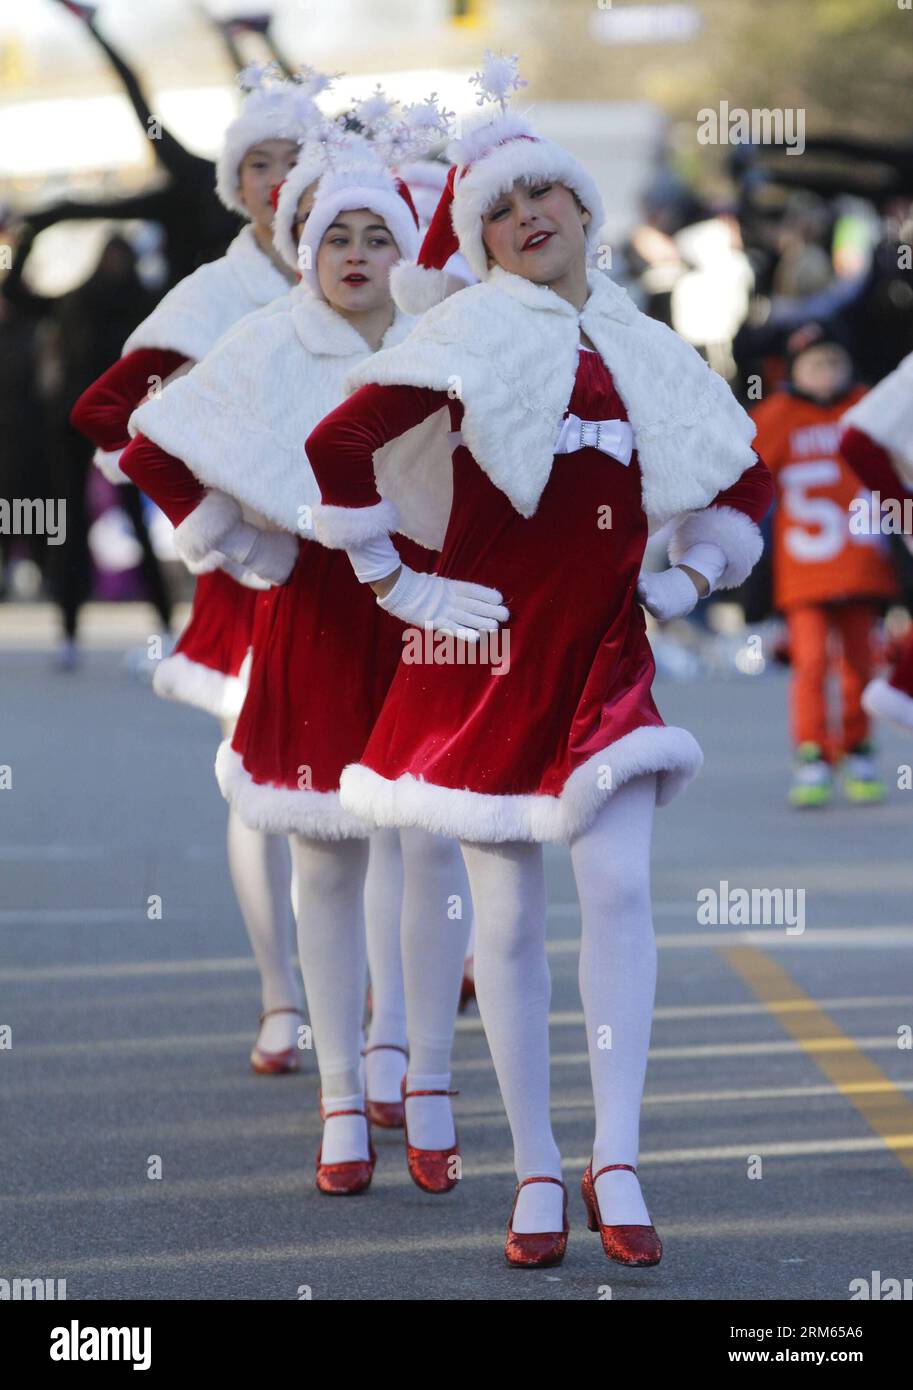 Bildnummer: 60806626  Datum: 07.12.2013  Copyright: imago/Xinhua     Participants dance during the 25th Christmas parade in downtown New Westminster, Canada, Dec. 7, 2013. More than 50 groups attended the parade on Saturday. (Xinhua/Liang Sen) CANADA-VANCOUVER-CHRISTMAS PARADE PUBLICATIONxNOTxINxCHN xcb x0x 2013 hoch Stock Photo